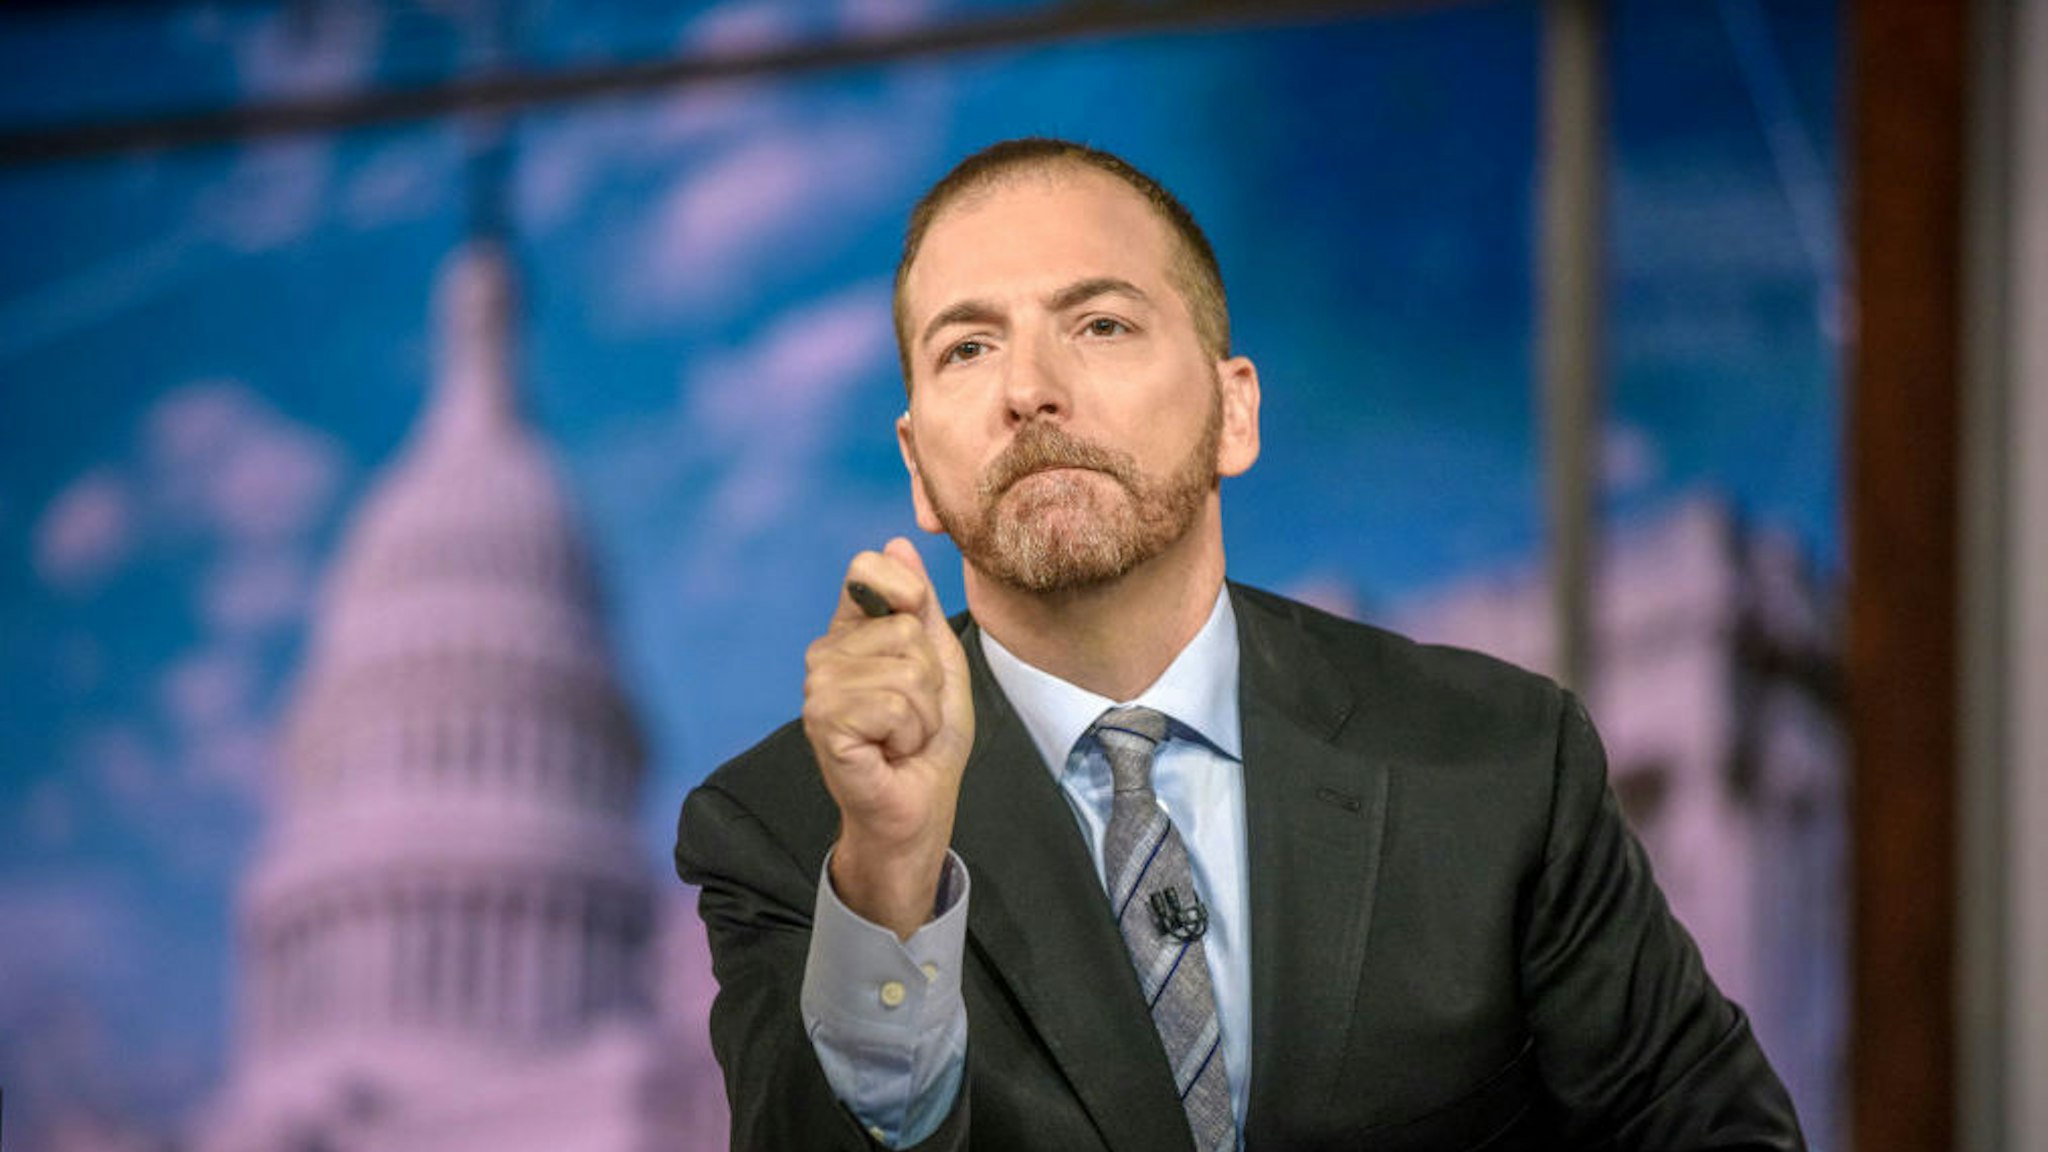 Moderator Chuck Todd appears on "Meet the Press" in Washington, D.C., Sunday August 4, 2019. (Photo by: William B. Plowman/NBC/NBC Newswire/NBCUniversal via Getty Images)